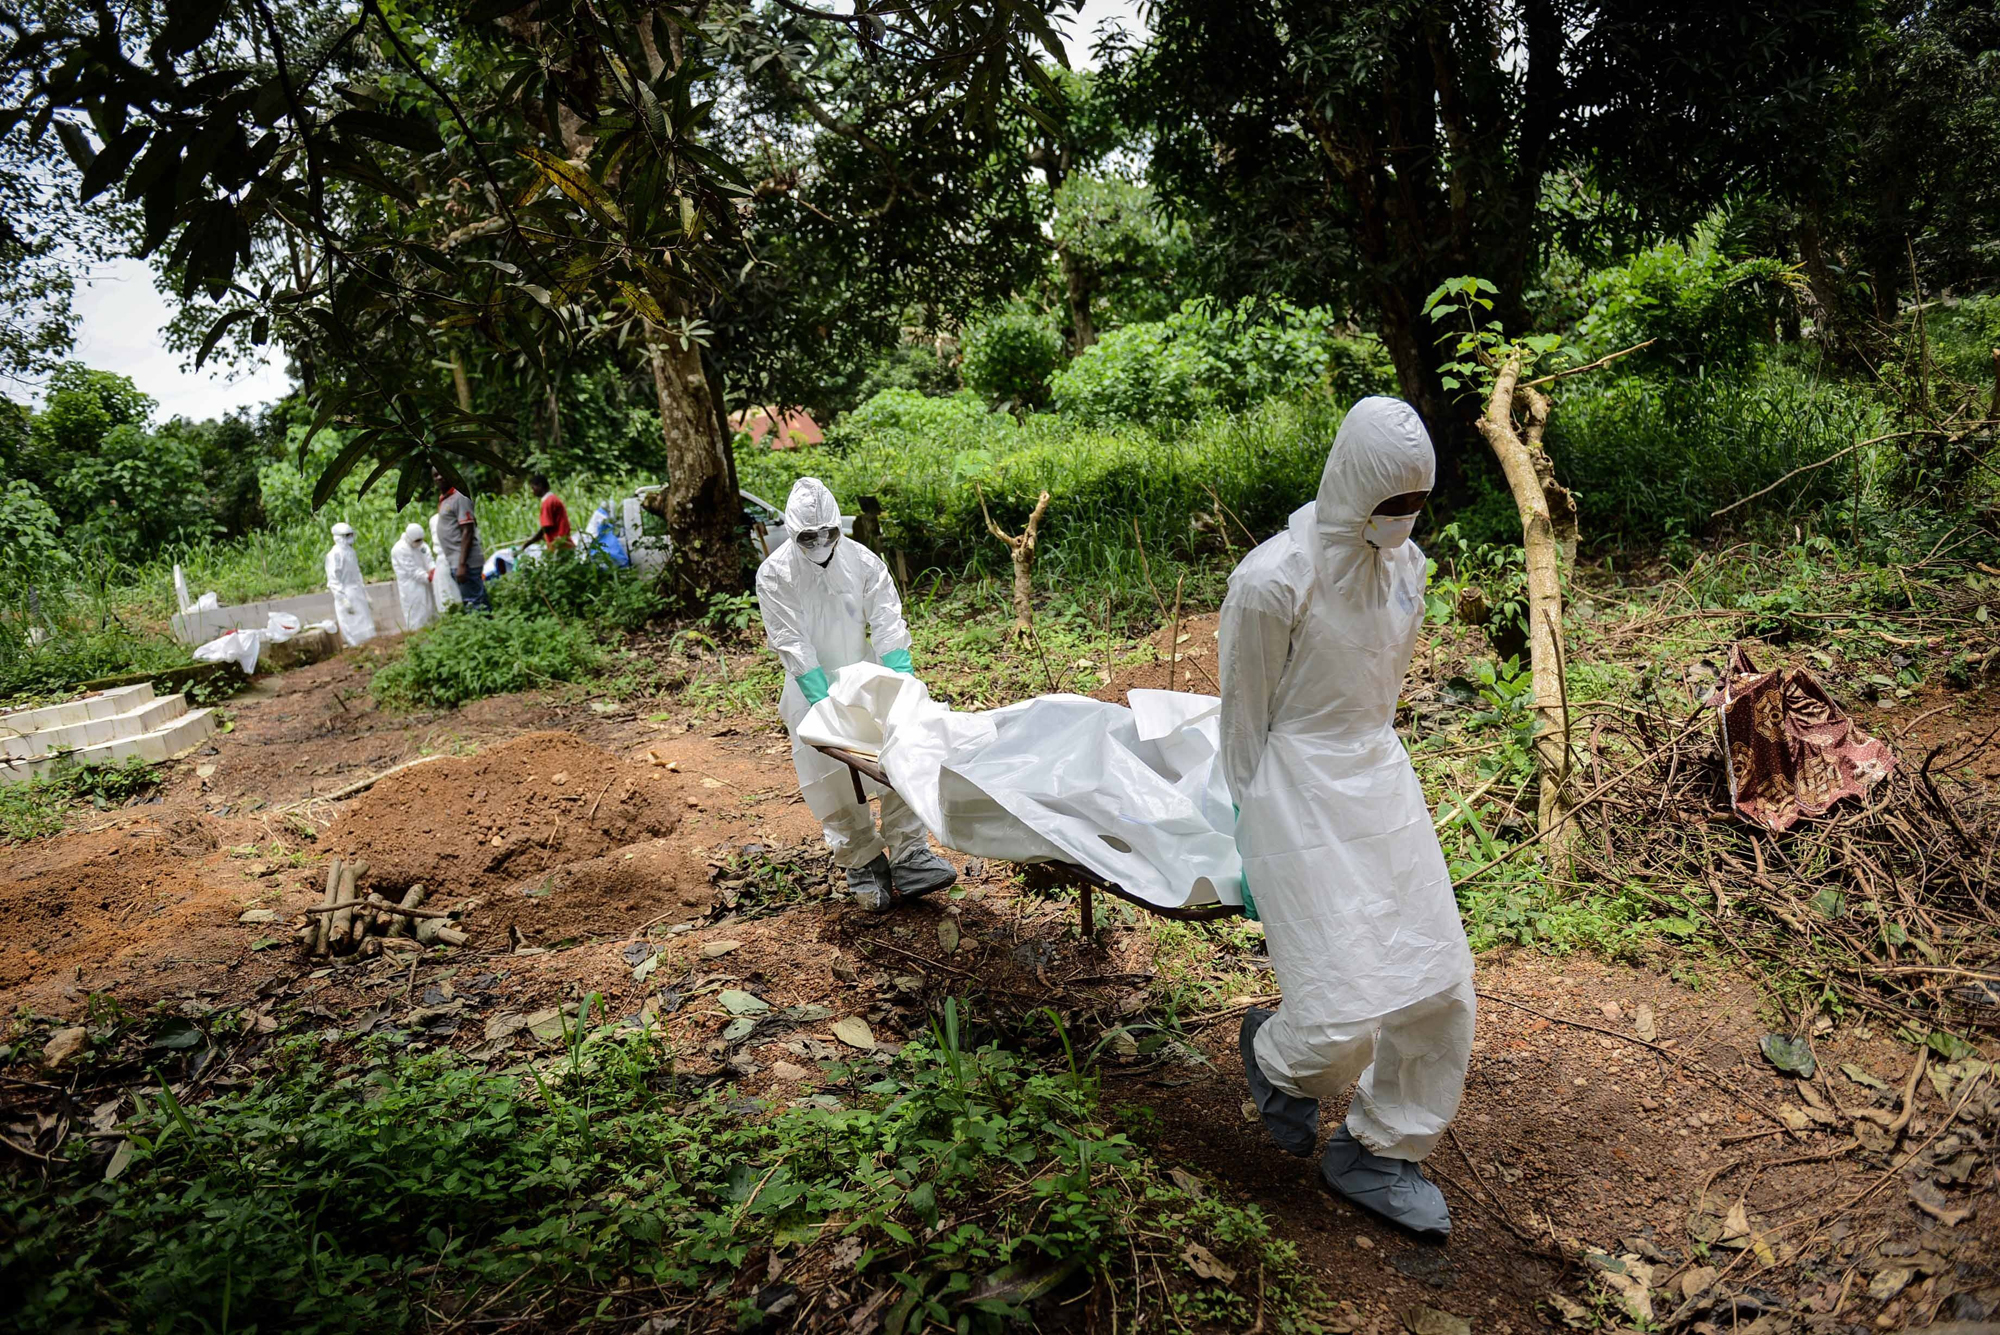 A group of young volunteers wear special uniforms for the burial of Ebola victims in Kenema, Sierra Leone on Aug. 24, 2014. (Mohammed Elshamy—Anadolu Agency/Getty Images)